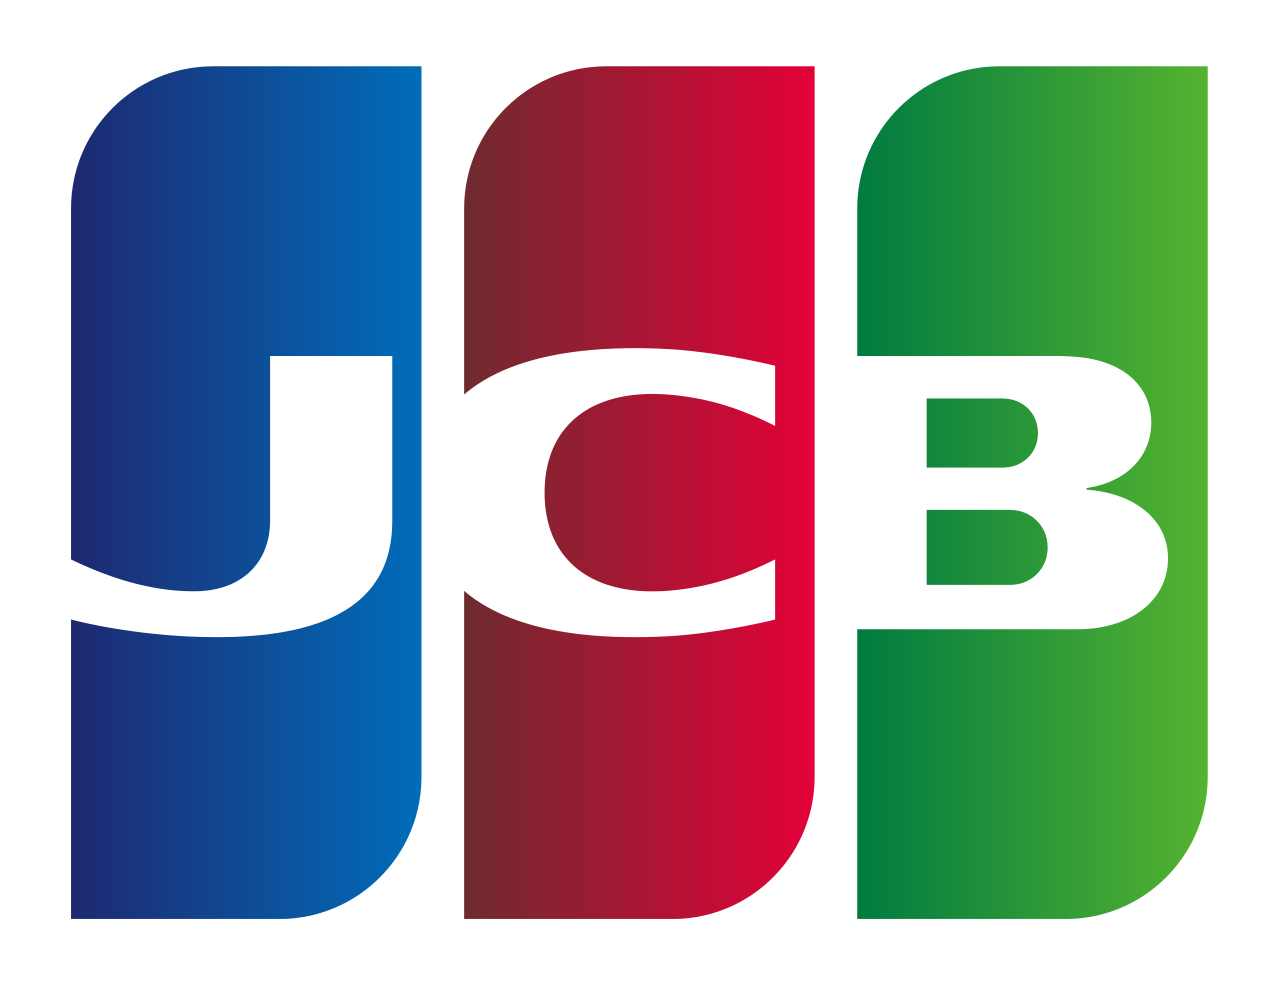 JCB and Bank BRI To Announce a New Partnership for Card Payment Business